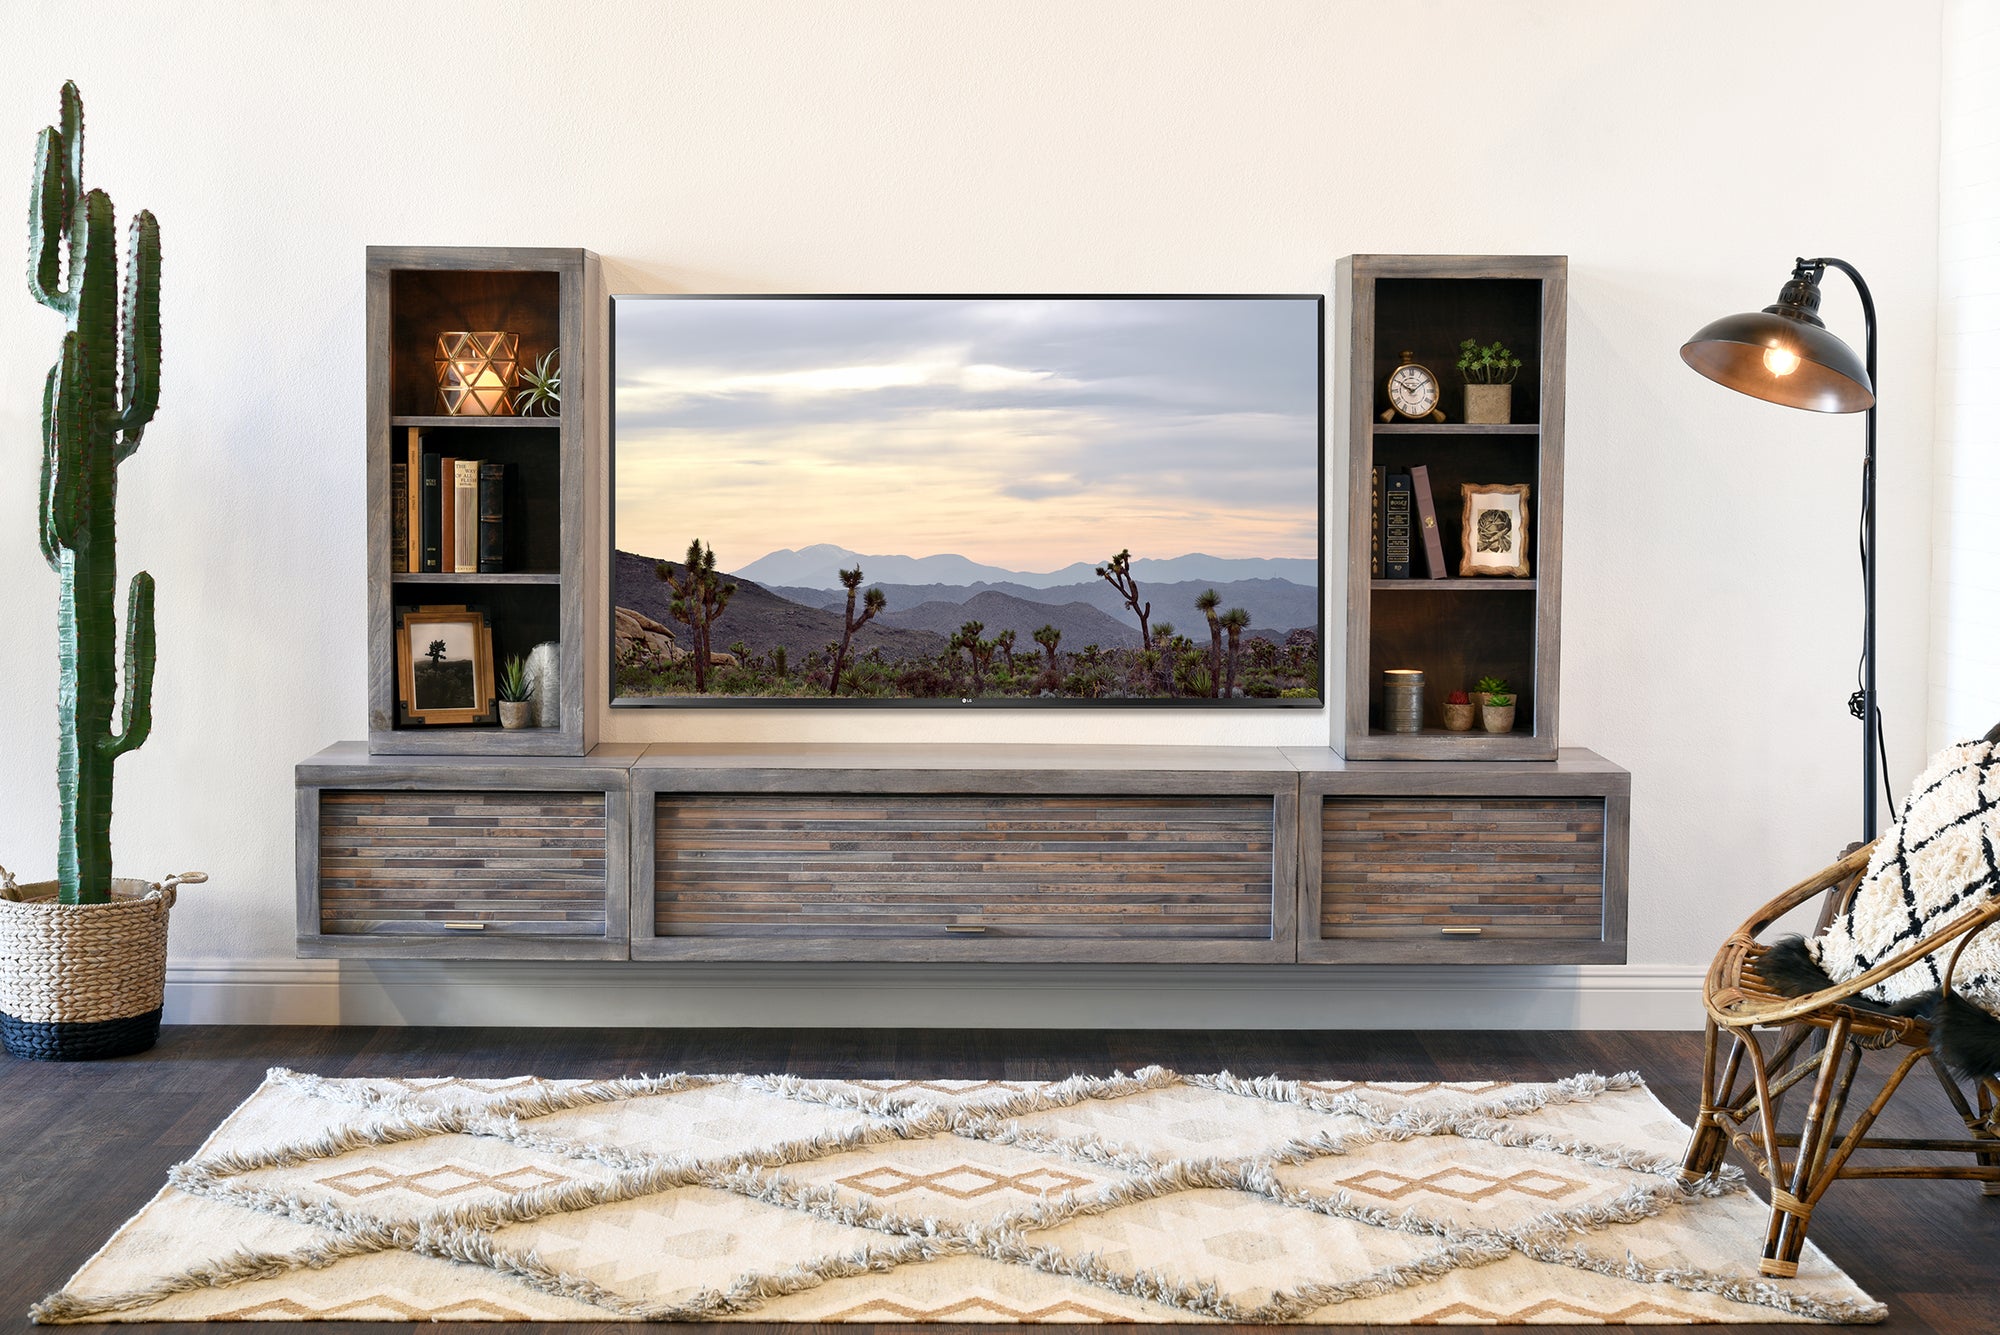 Gray Floating TV Stand Modern Wall Mount Entertainment Center